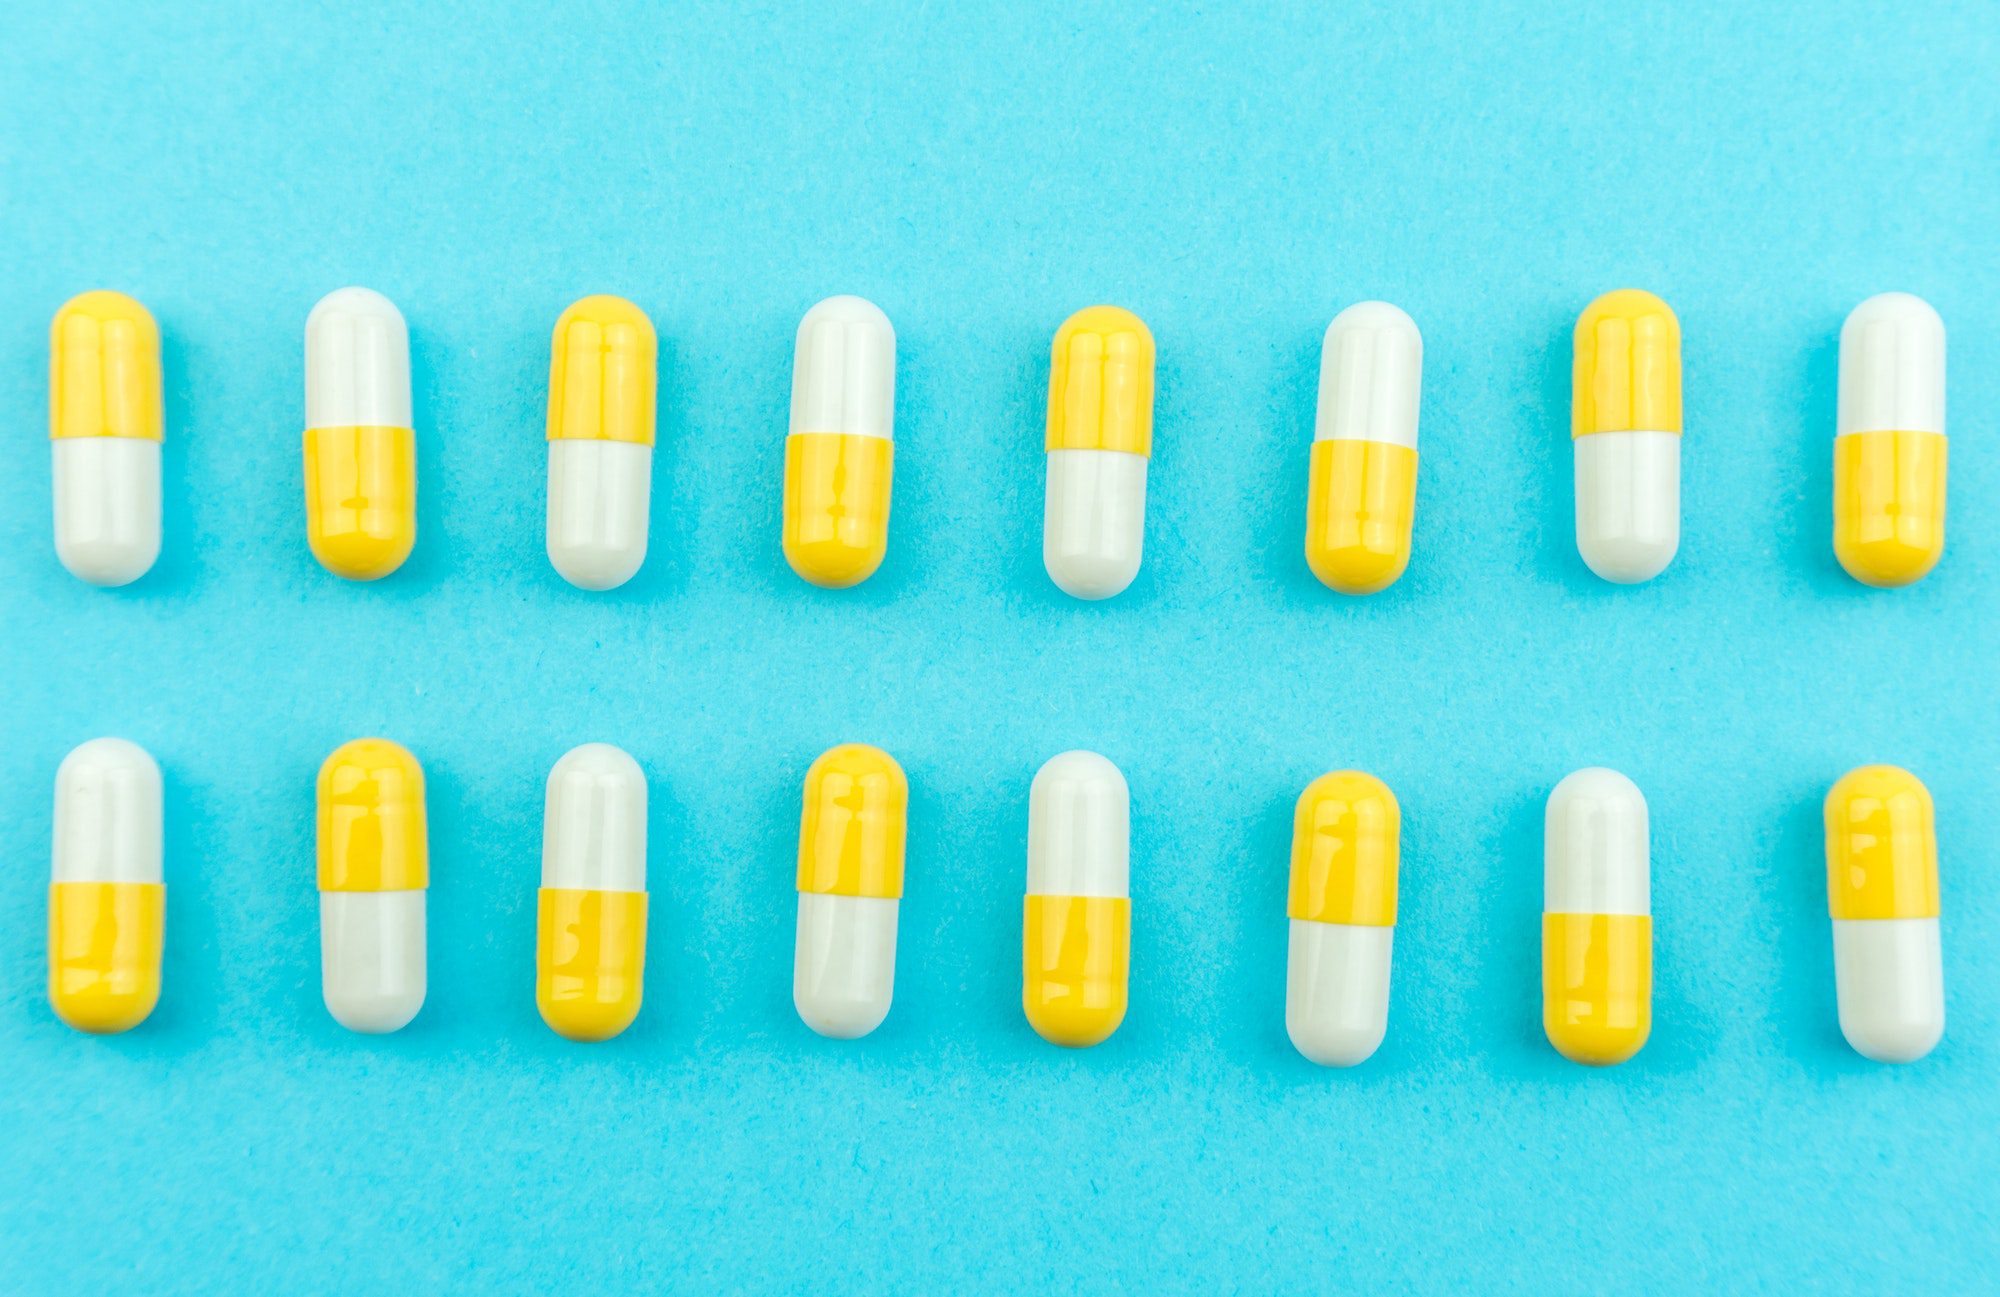 Assortment of capsules vitamins or prescription drugs used for a Private Fee-for-Service plans.